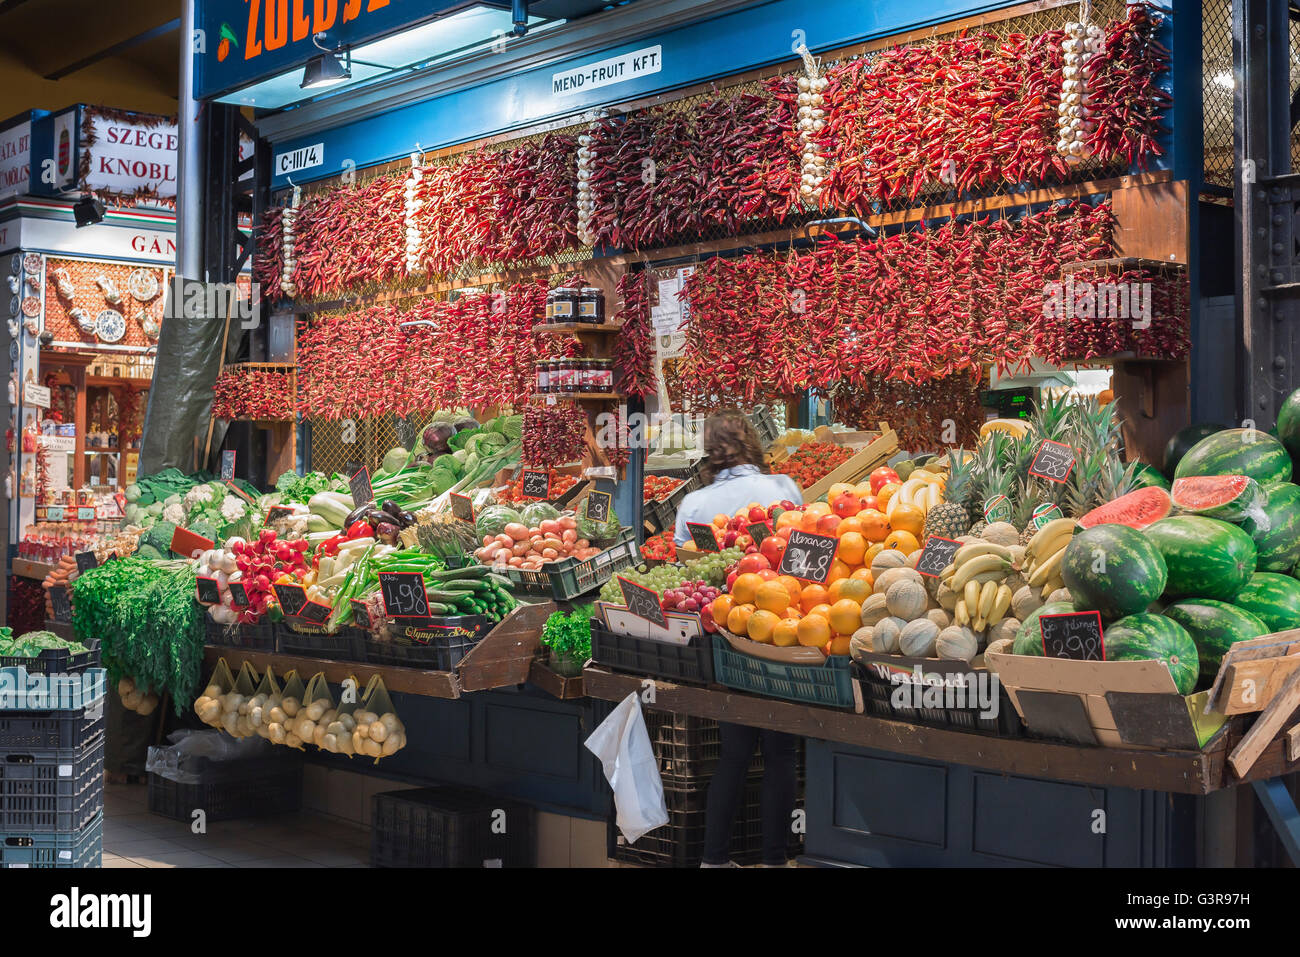 Budapest food market, view of a fruit and vegetable stall inside the Great Market Hall in the Jozsefvaros area of Budapest, Hungary. Stock Photo